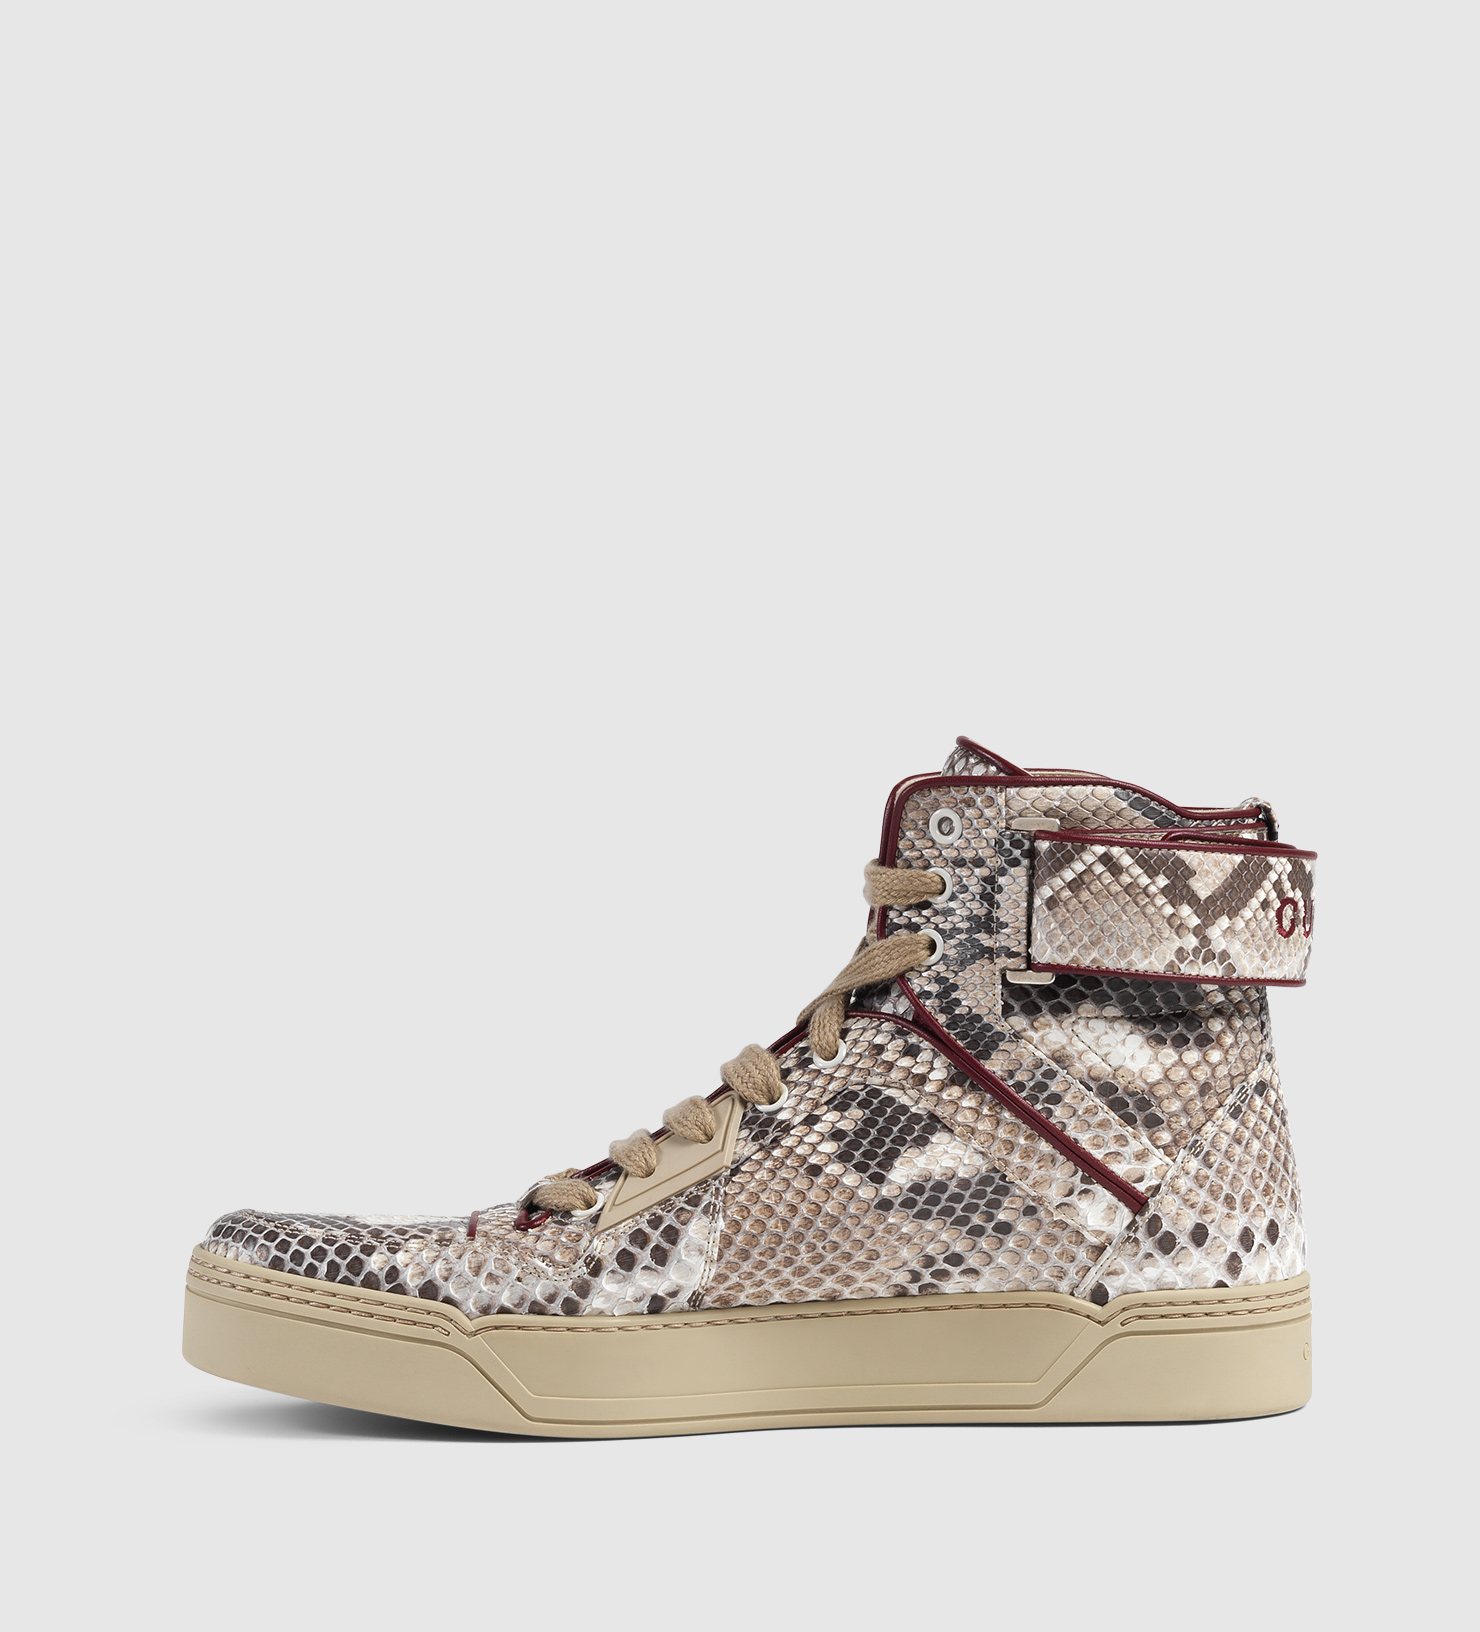 Lyst - Gucci Exclusive Python High-top Sneaker in Gray for Men